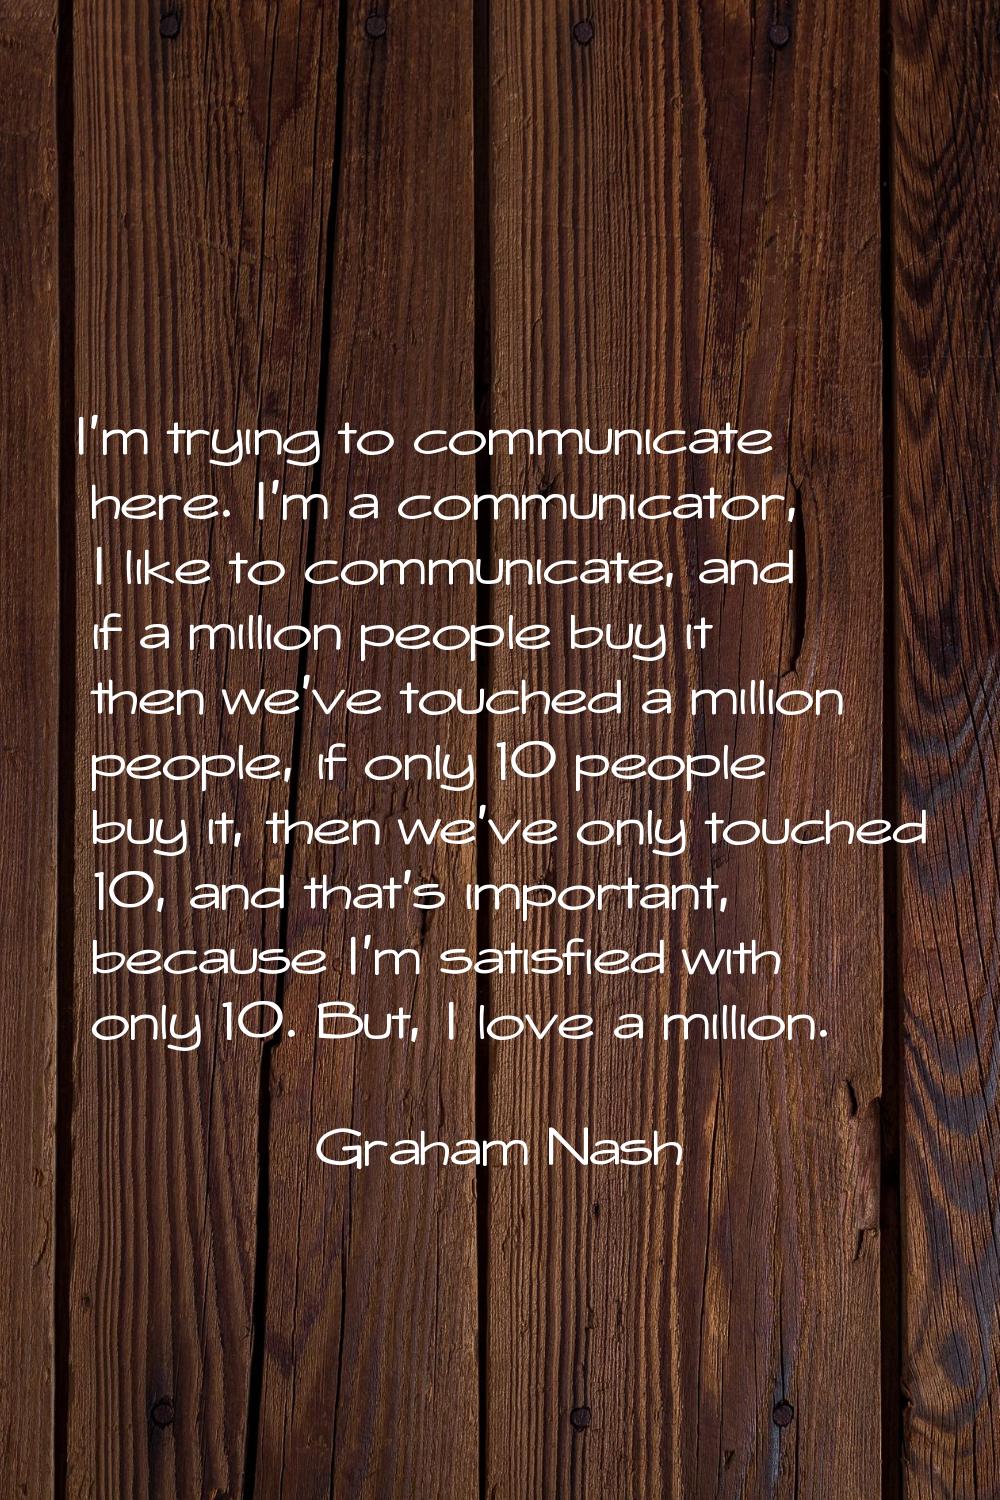 I'm trying to communicate here. I'm a communicator, I like to communicate, and if a million people 